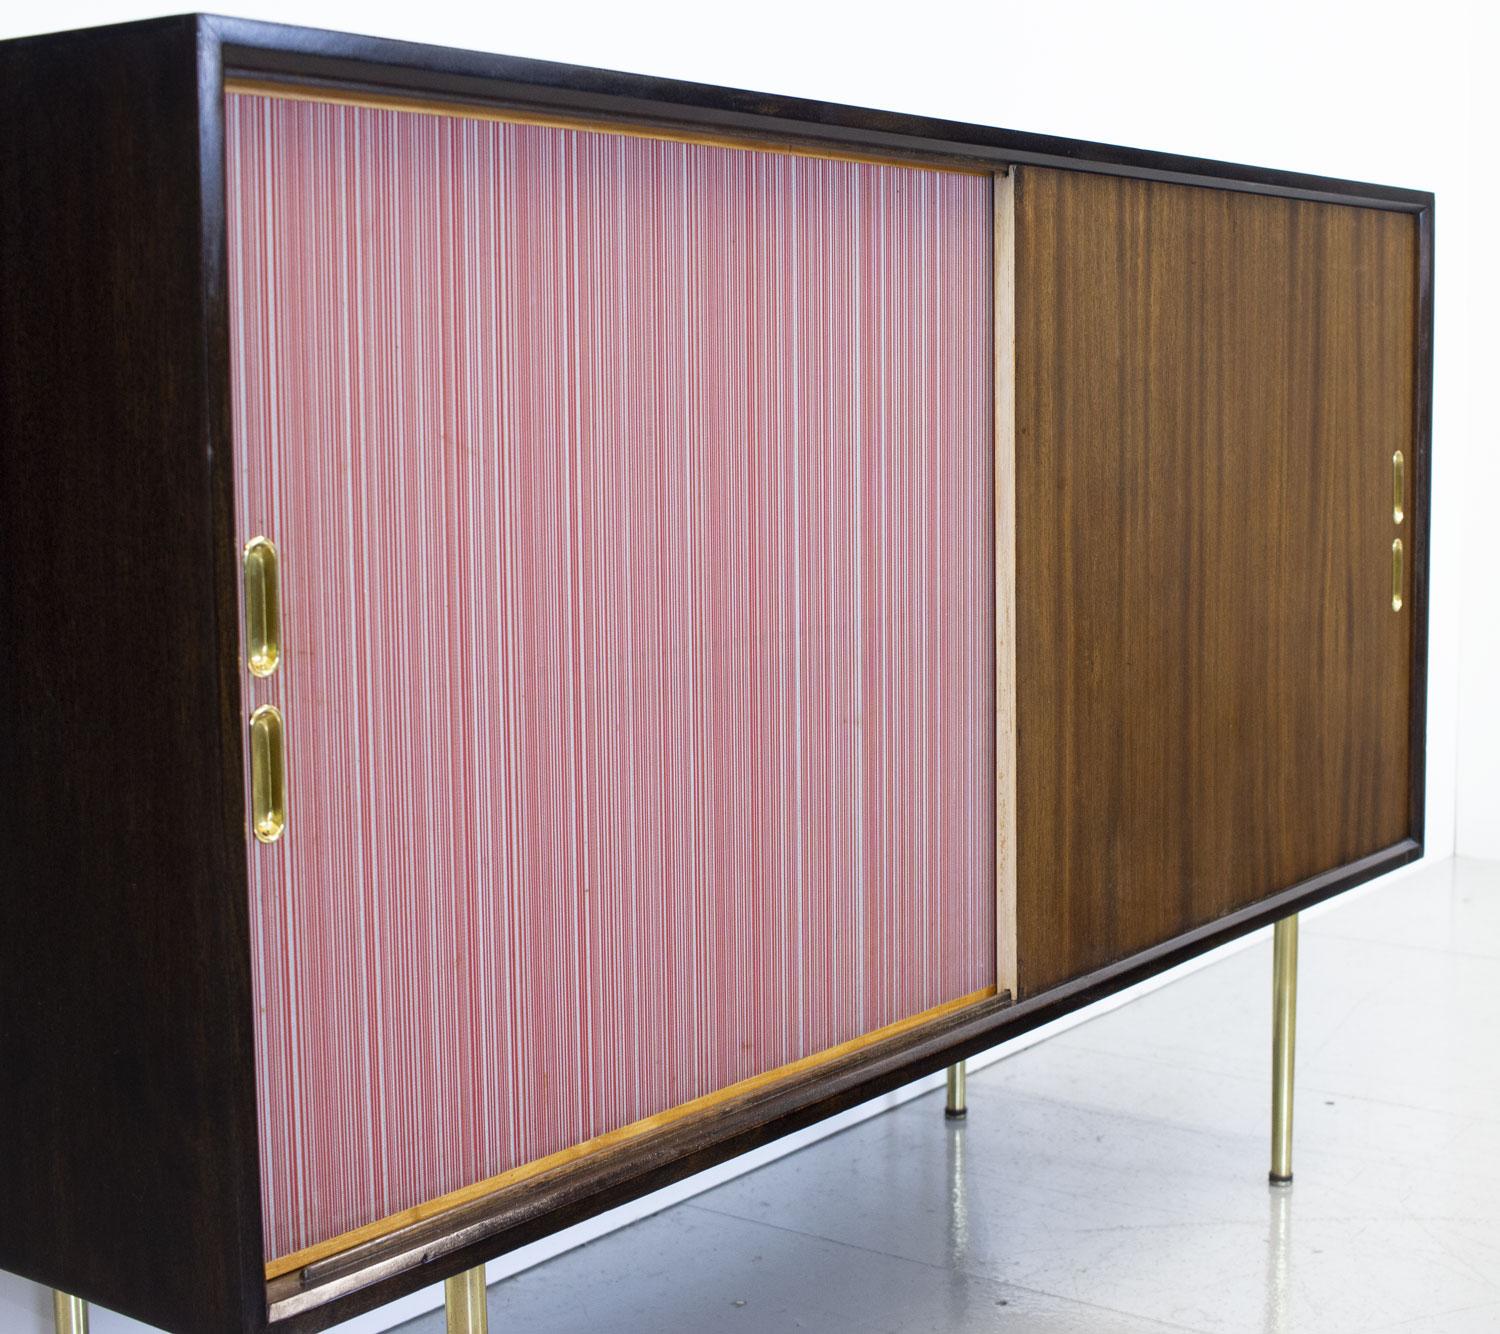 A rare 1950s sideboard designed by Robin Day as part of the Utility range for Heals department store in London and exhibited in the Home and Gardens Pavilion at the Festival of Britain in 1951. The range came in ash and mahogany but this unusual